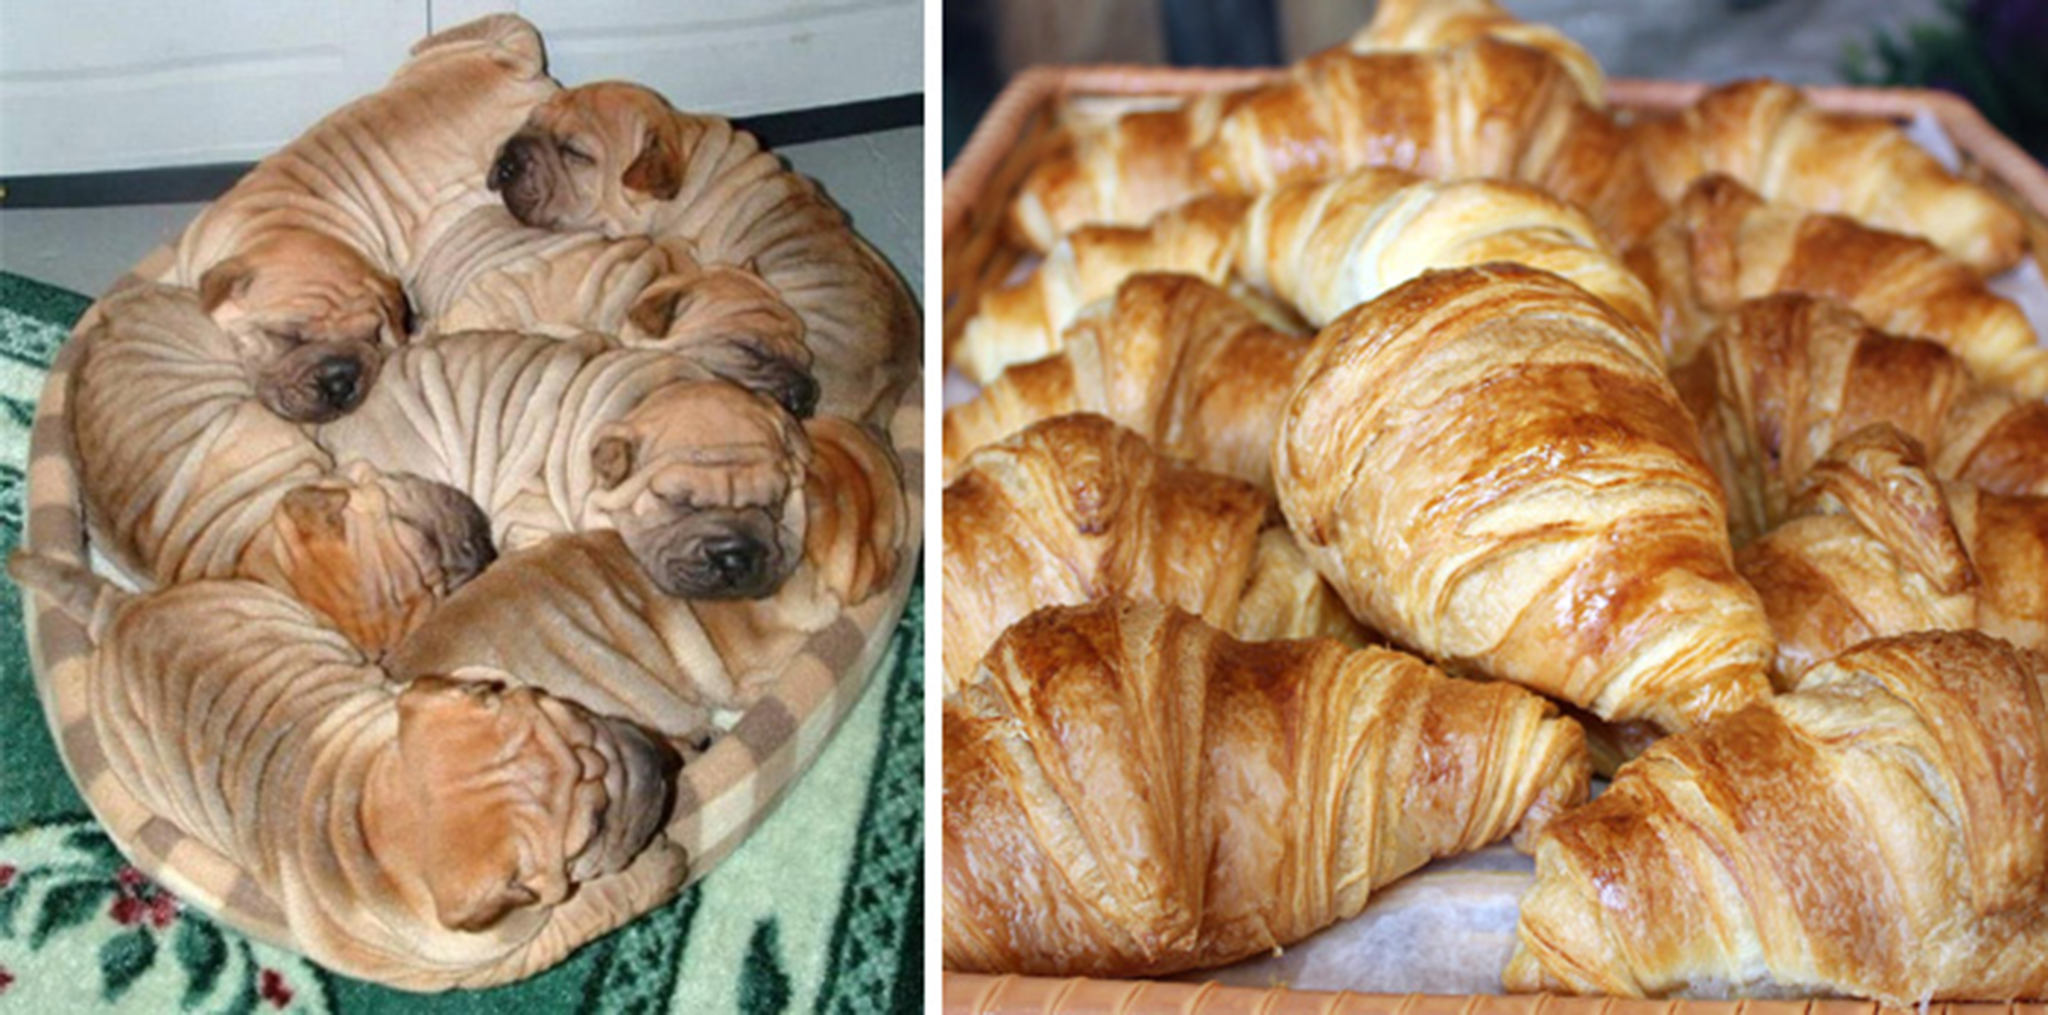 9. These Shar-Pei Puppies Look Like French Croissants